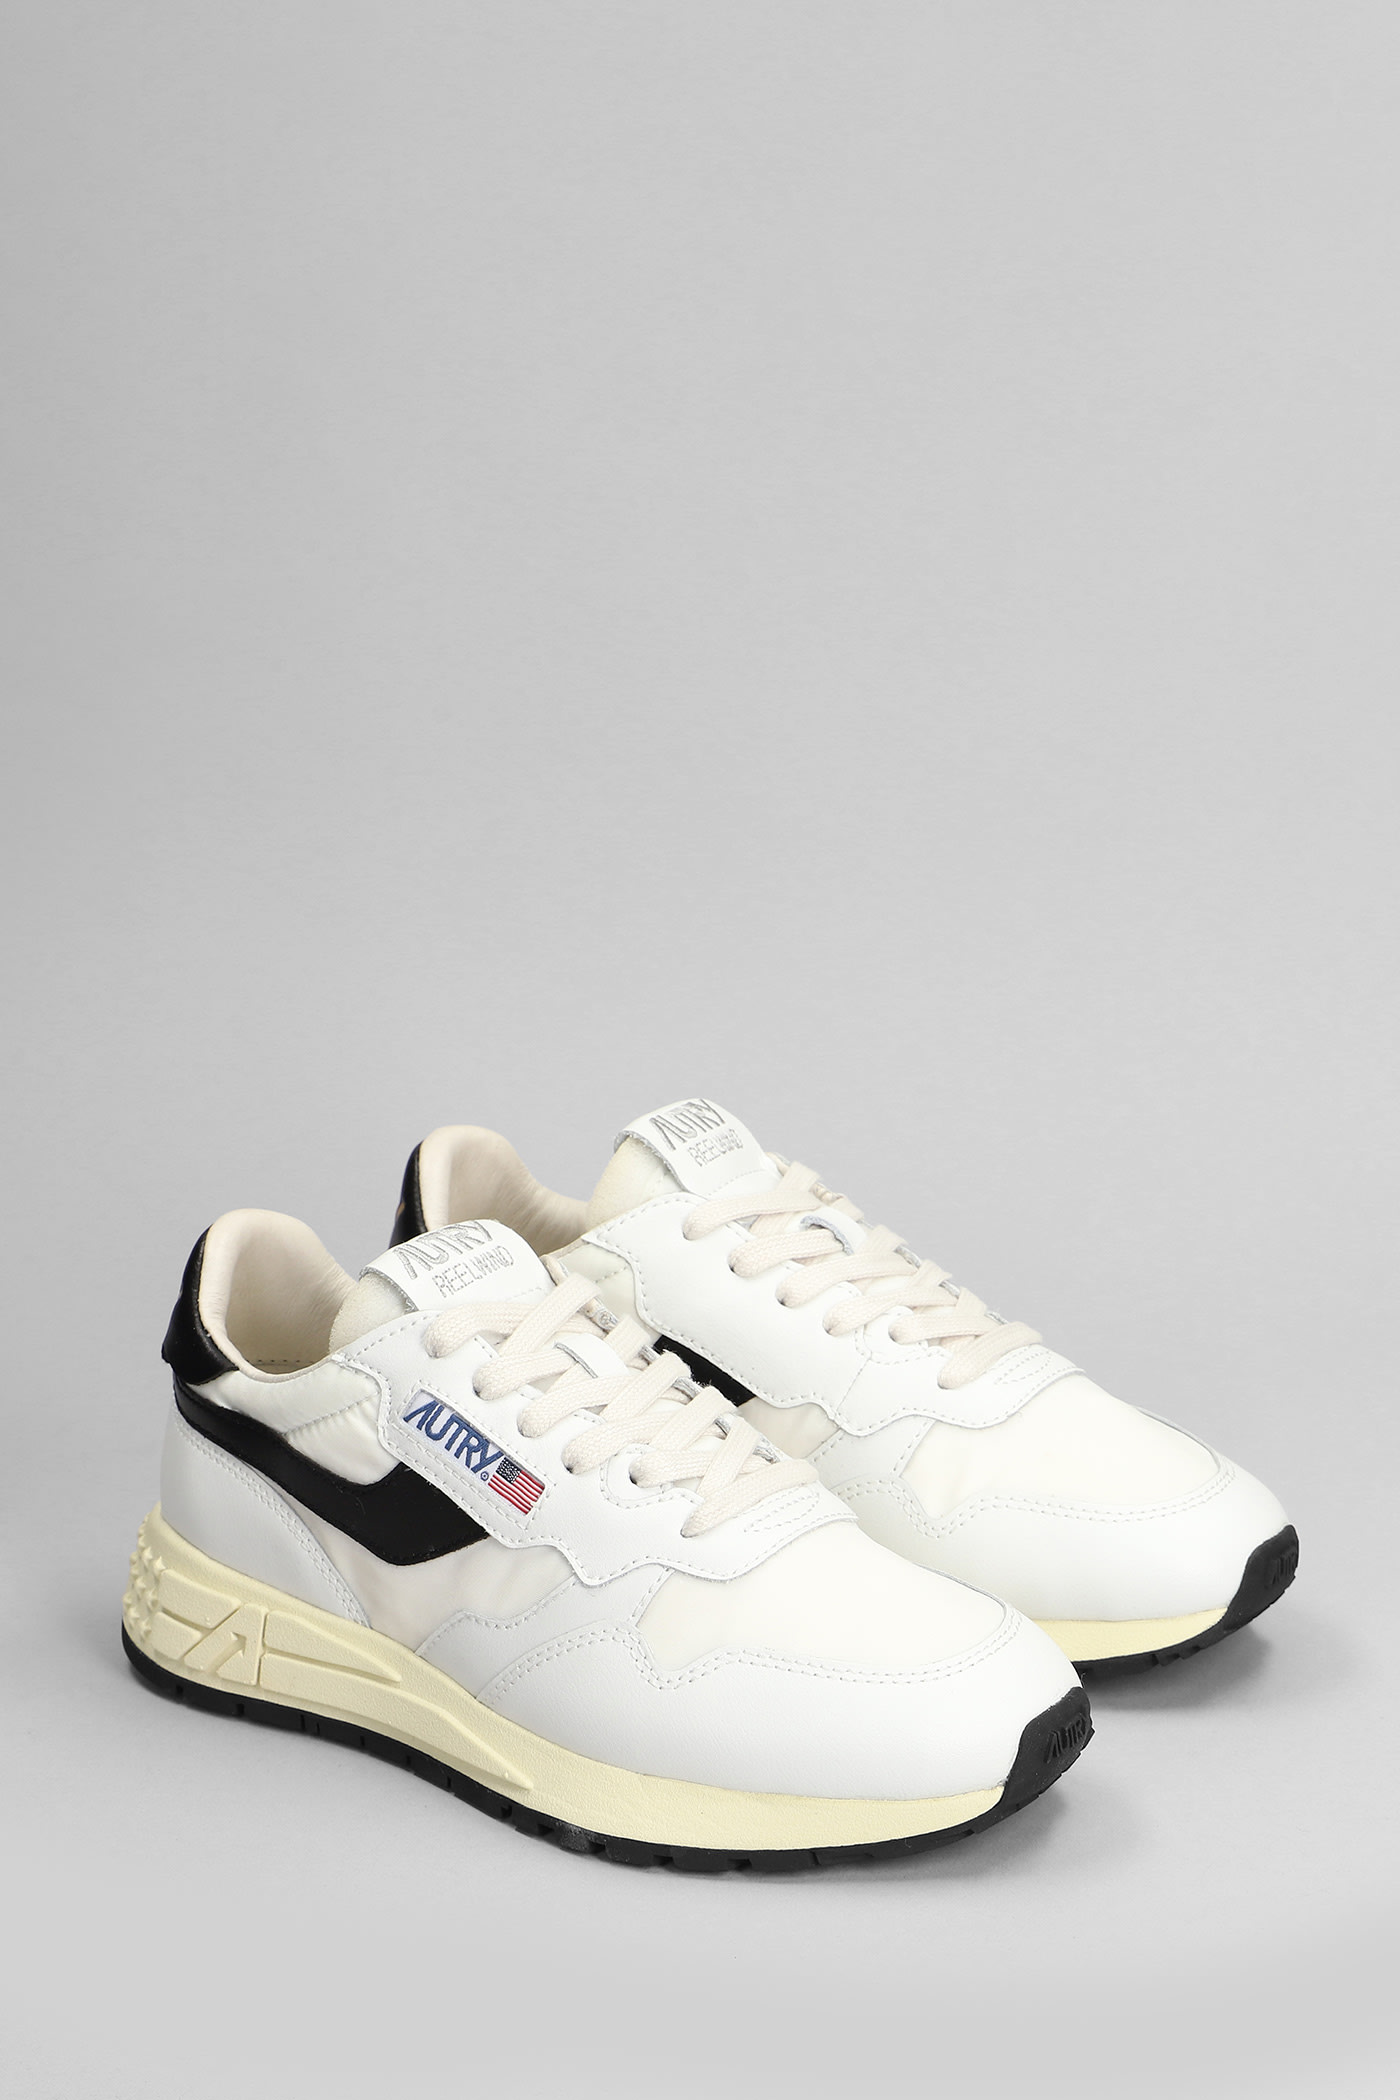 Shop Autry Reelwind Low Sneakers In White Leather And Fabric In White/black